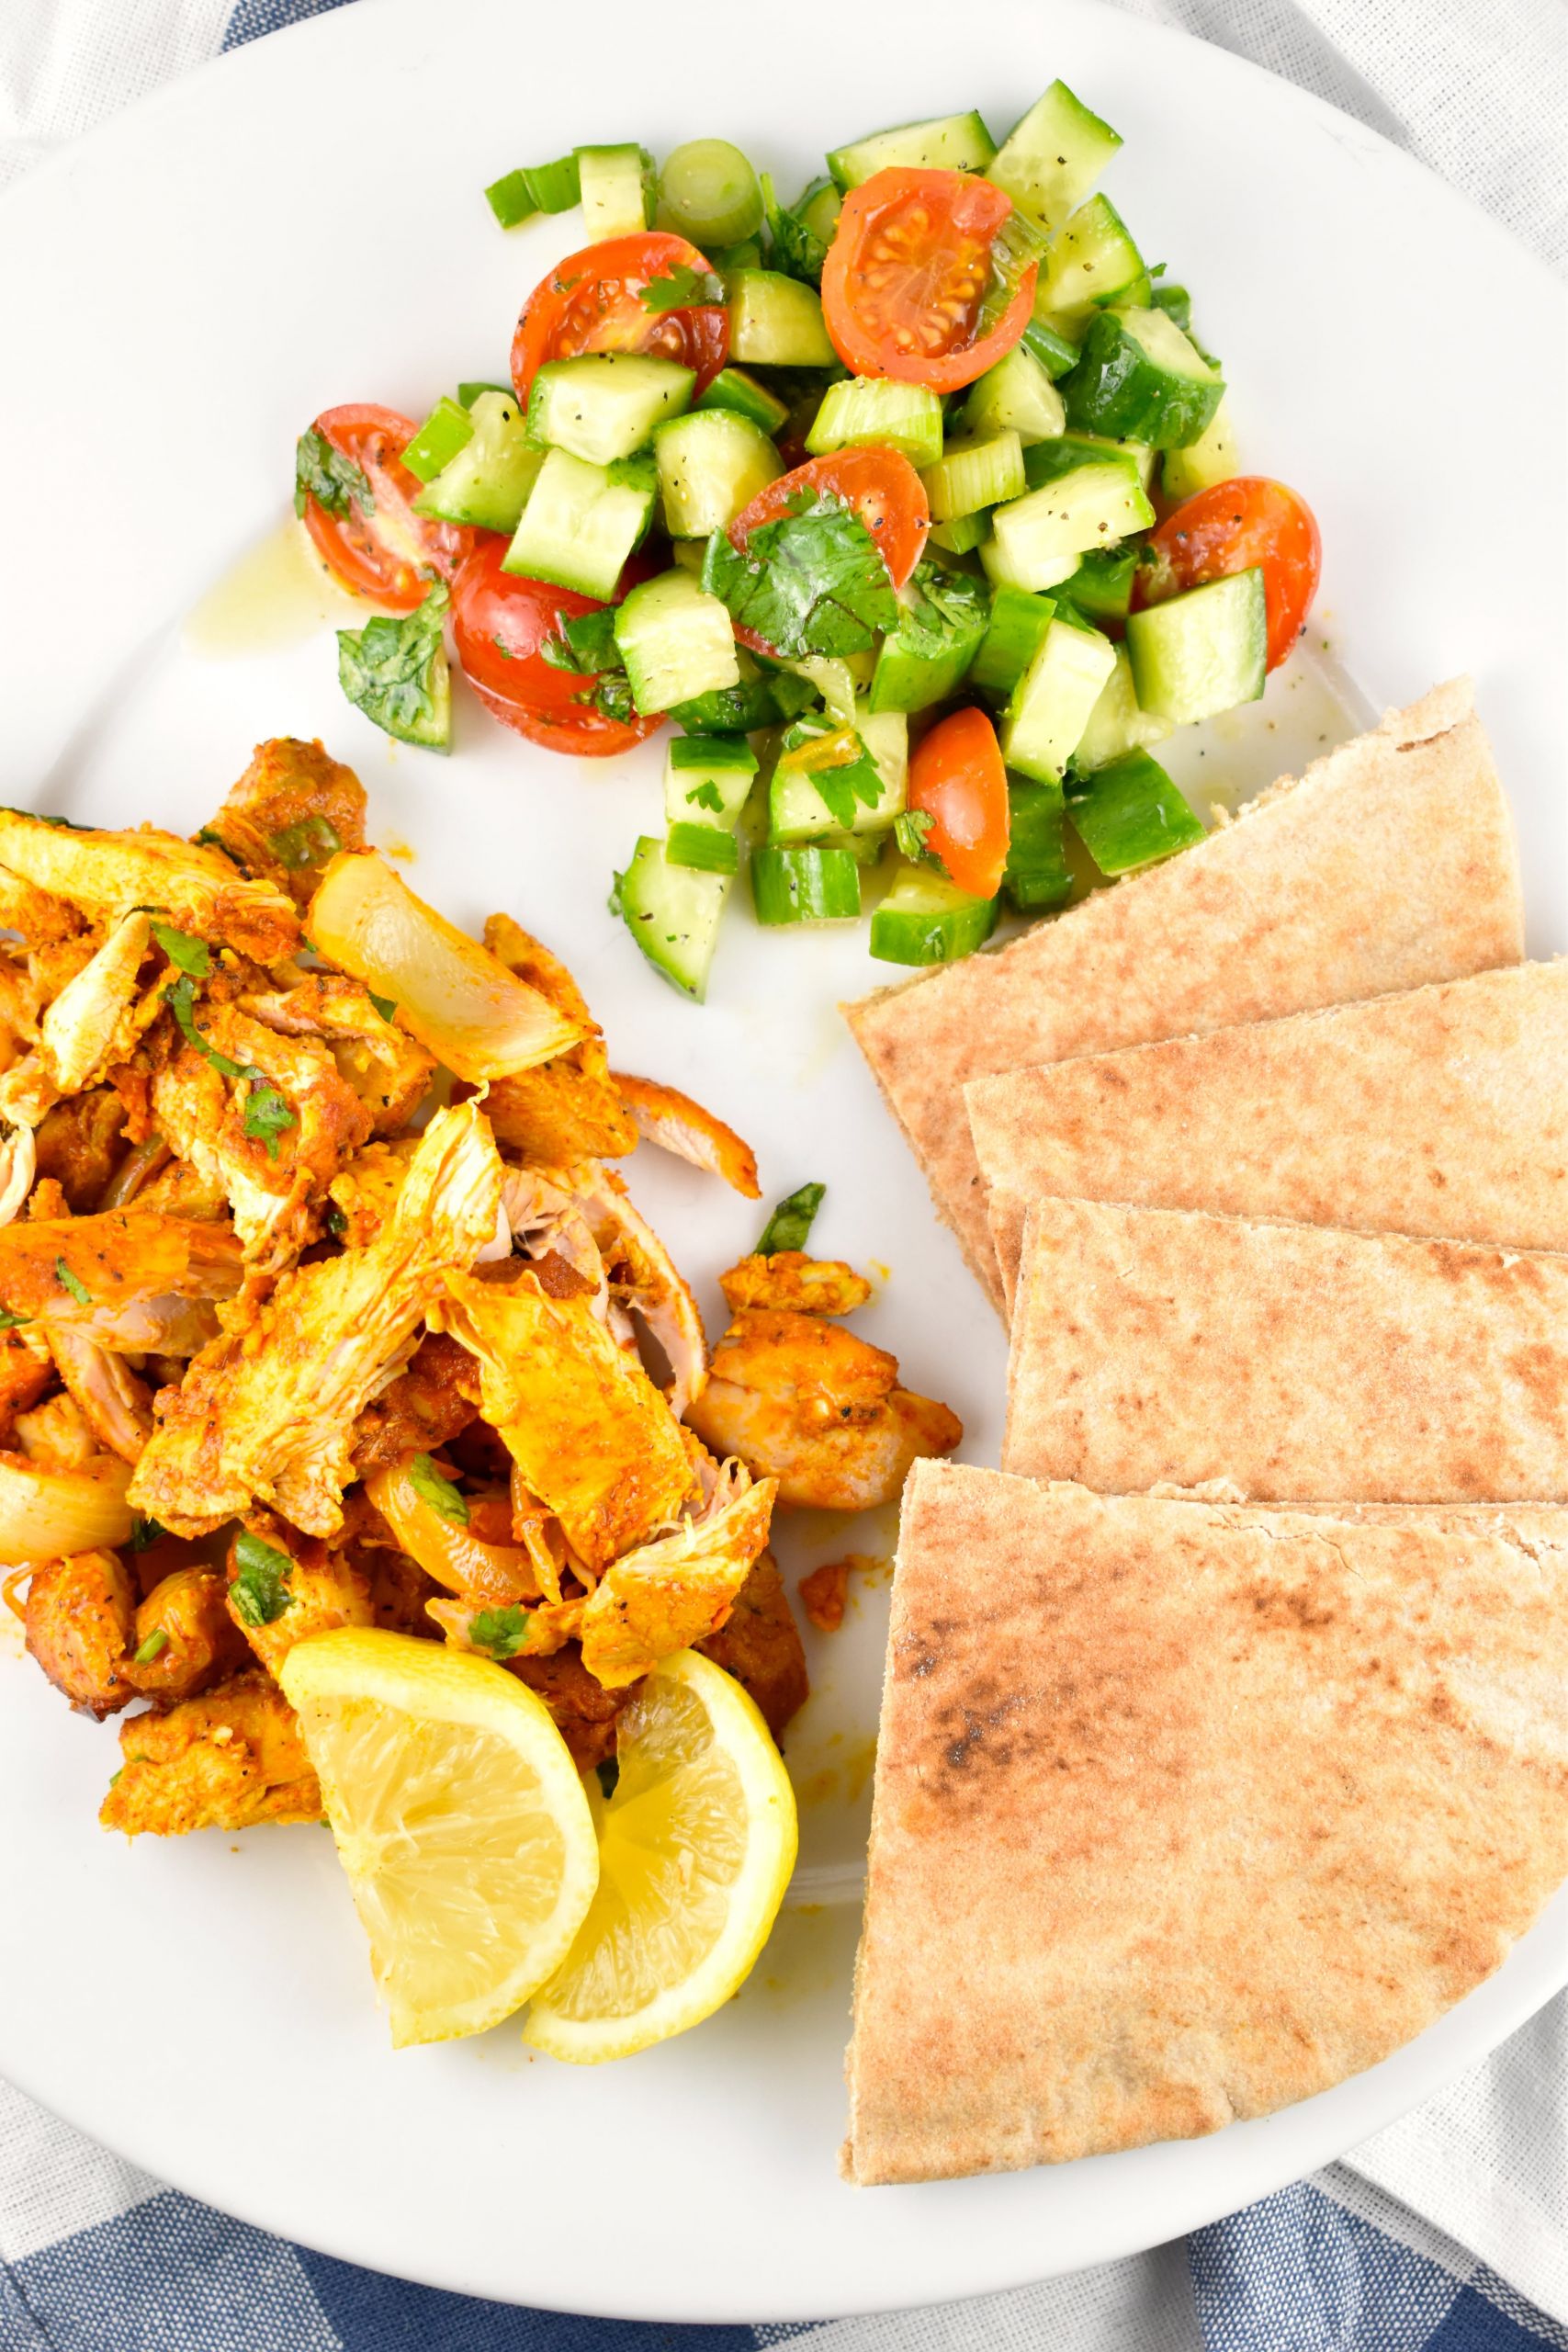 Oven Roasted Chicken Shawarma Awesome Oven Roasted Chicken Shawarma Recipe 5 Points Laaloosh